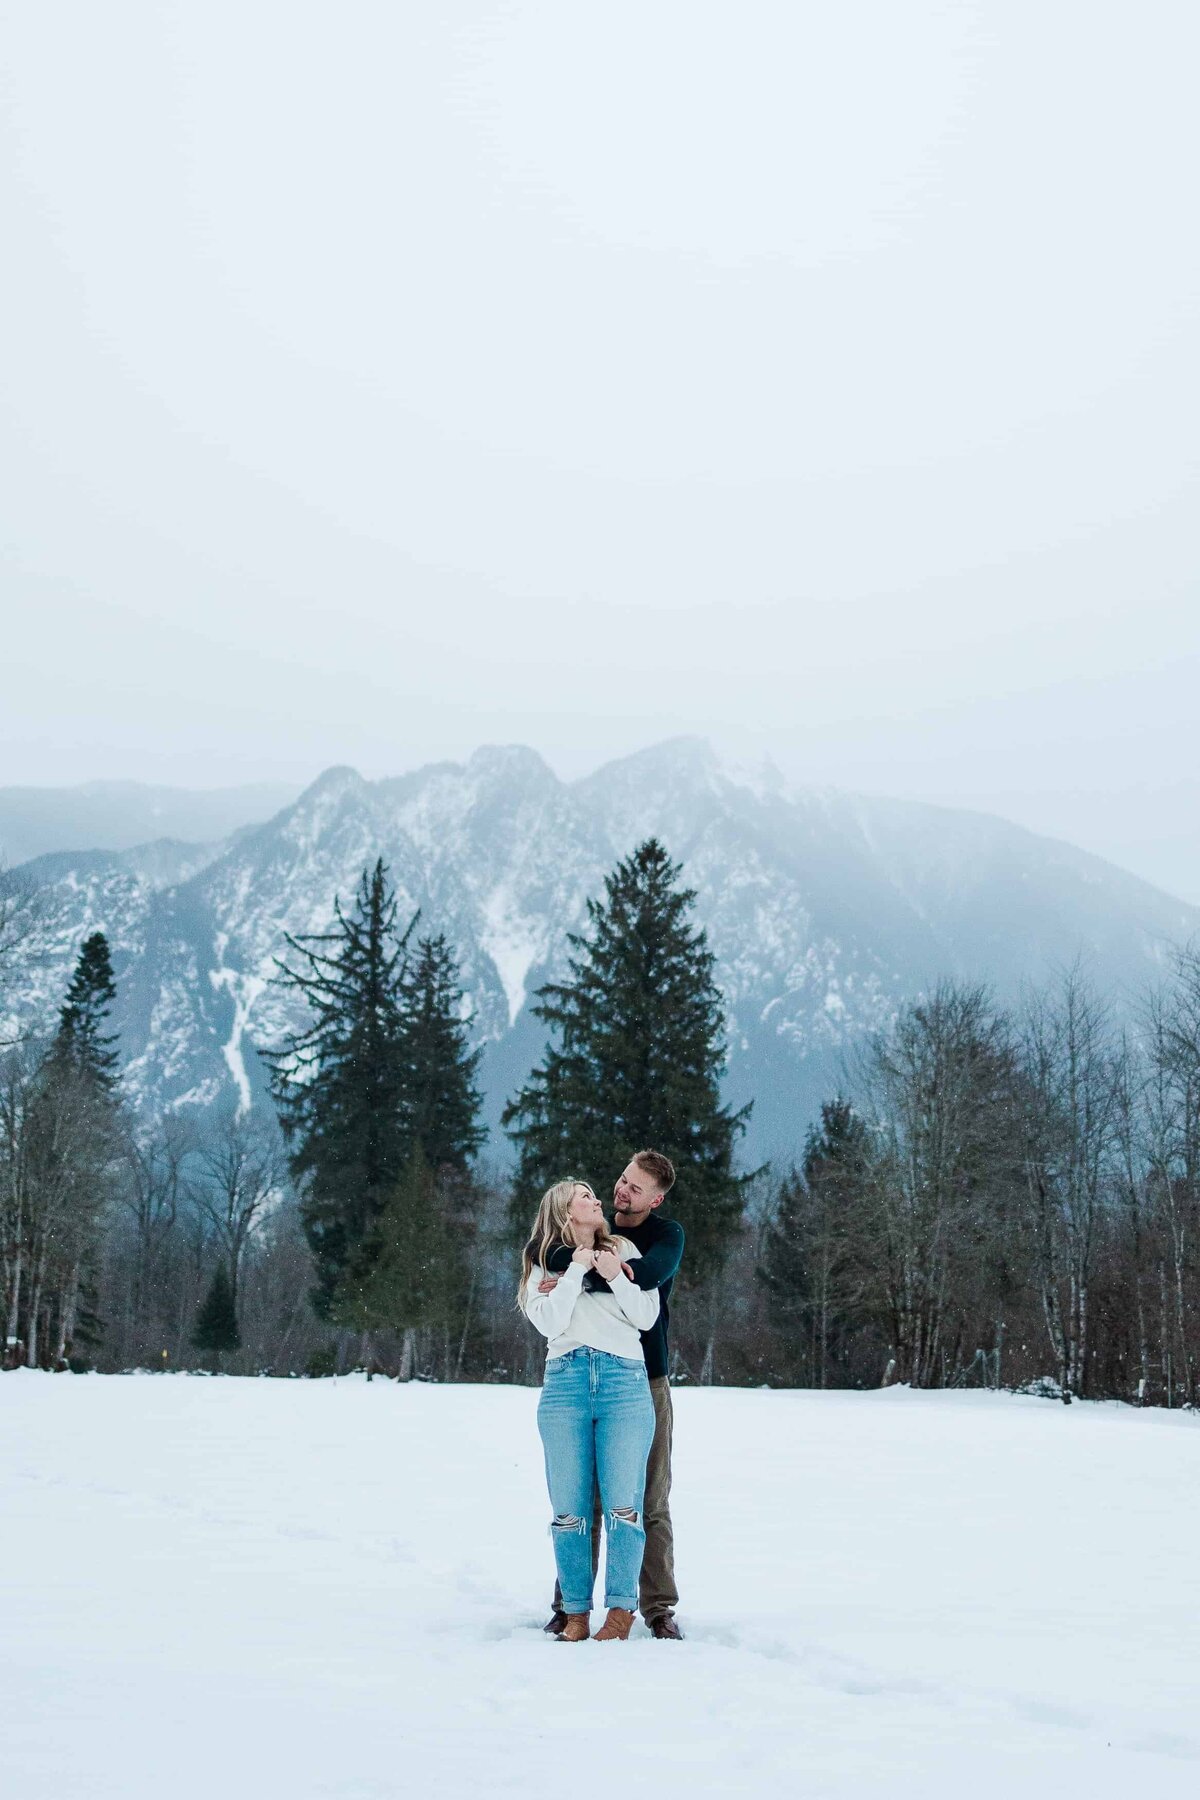 Snowy-Engagement-Meadowbrook-Farm-Northbend-WA-21237